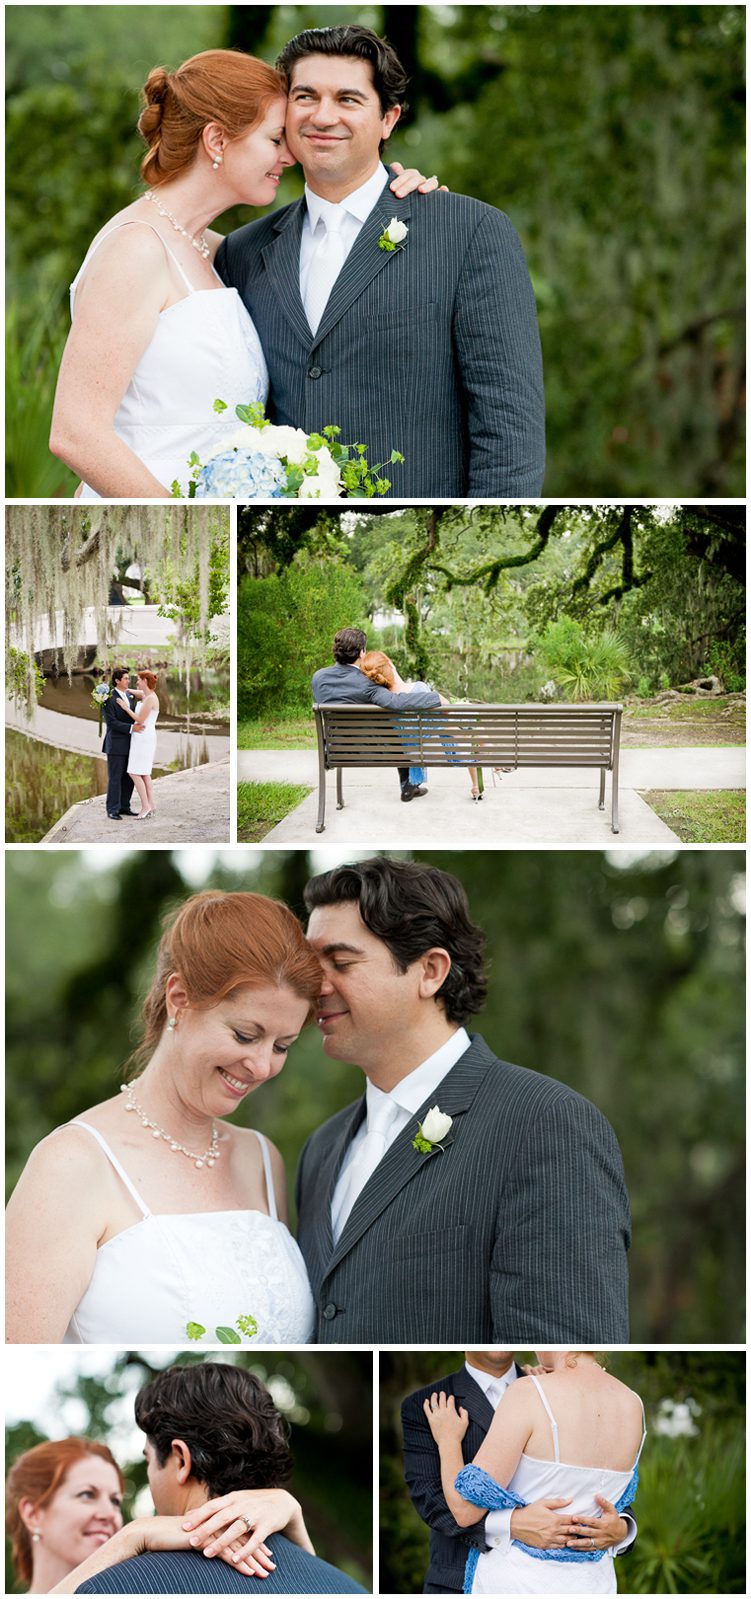 Newly married in New Orleans City Park